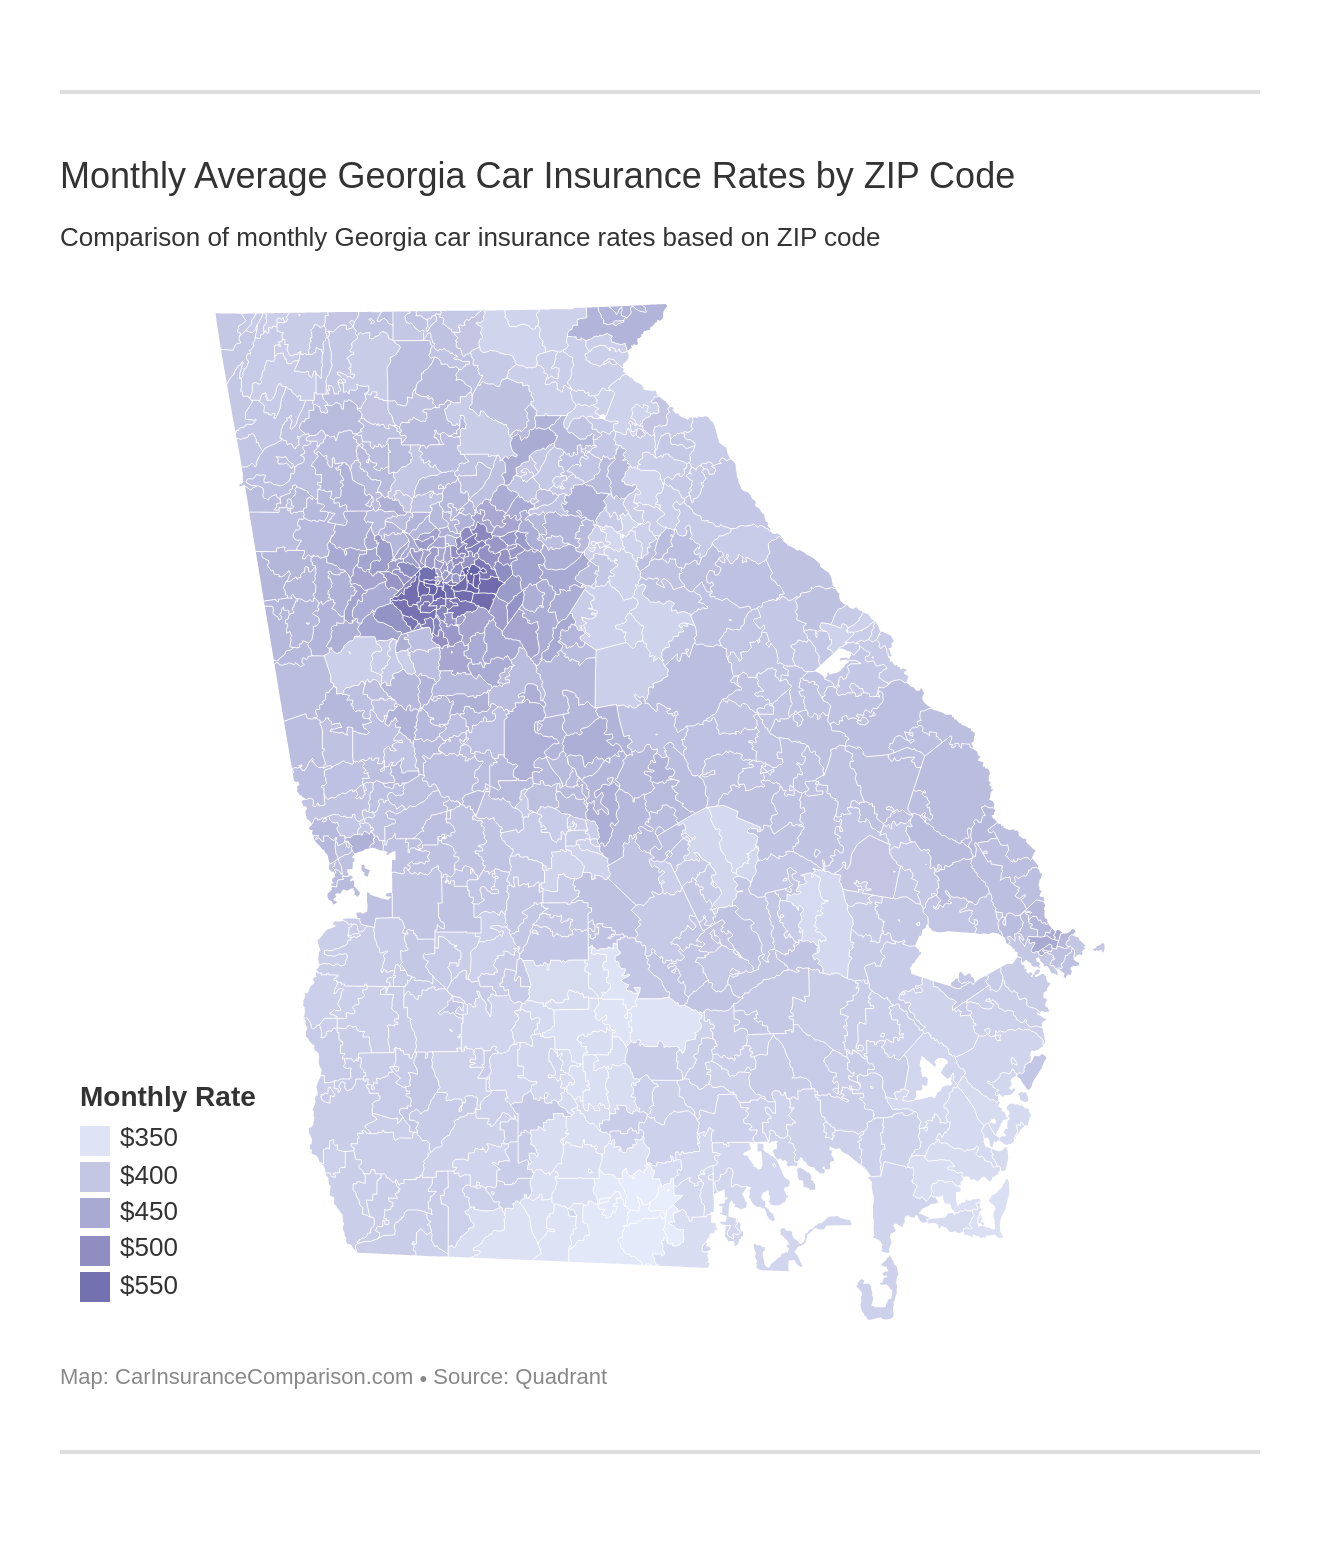 Monthly Average Georgia Car Insurance Rates by ZIP Code 